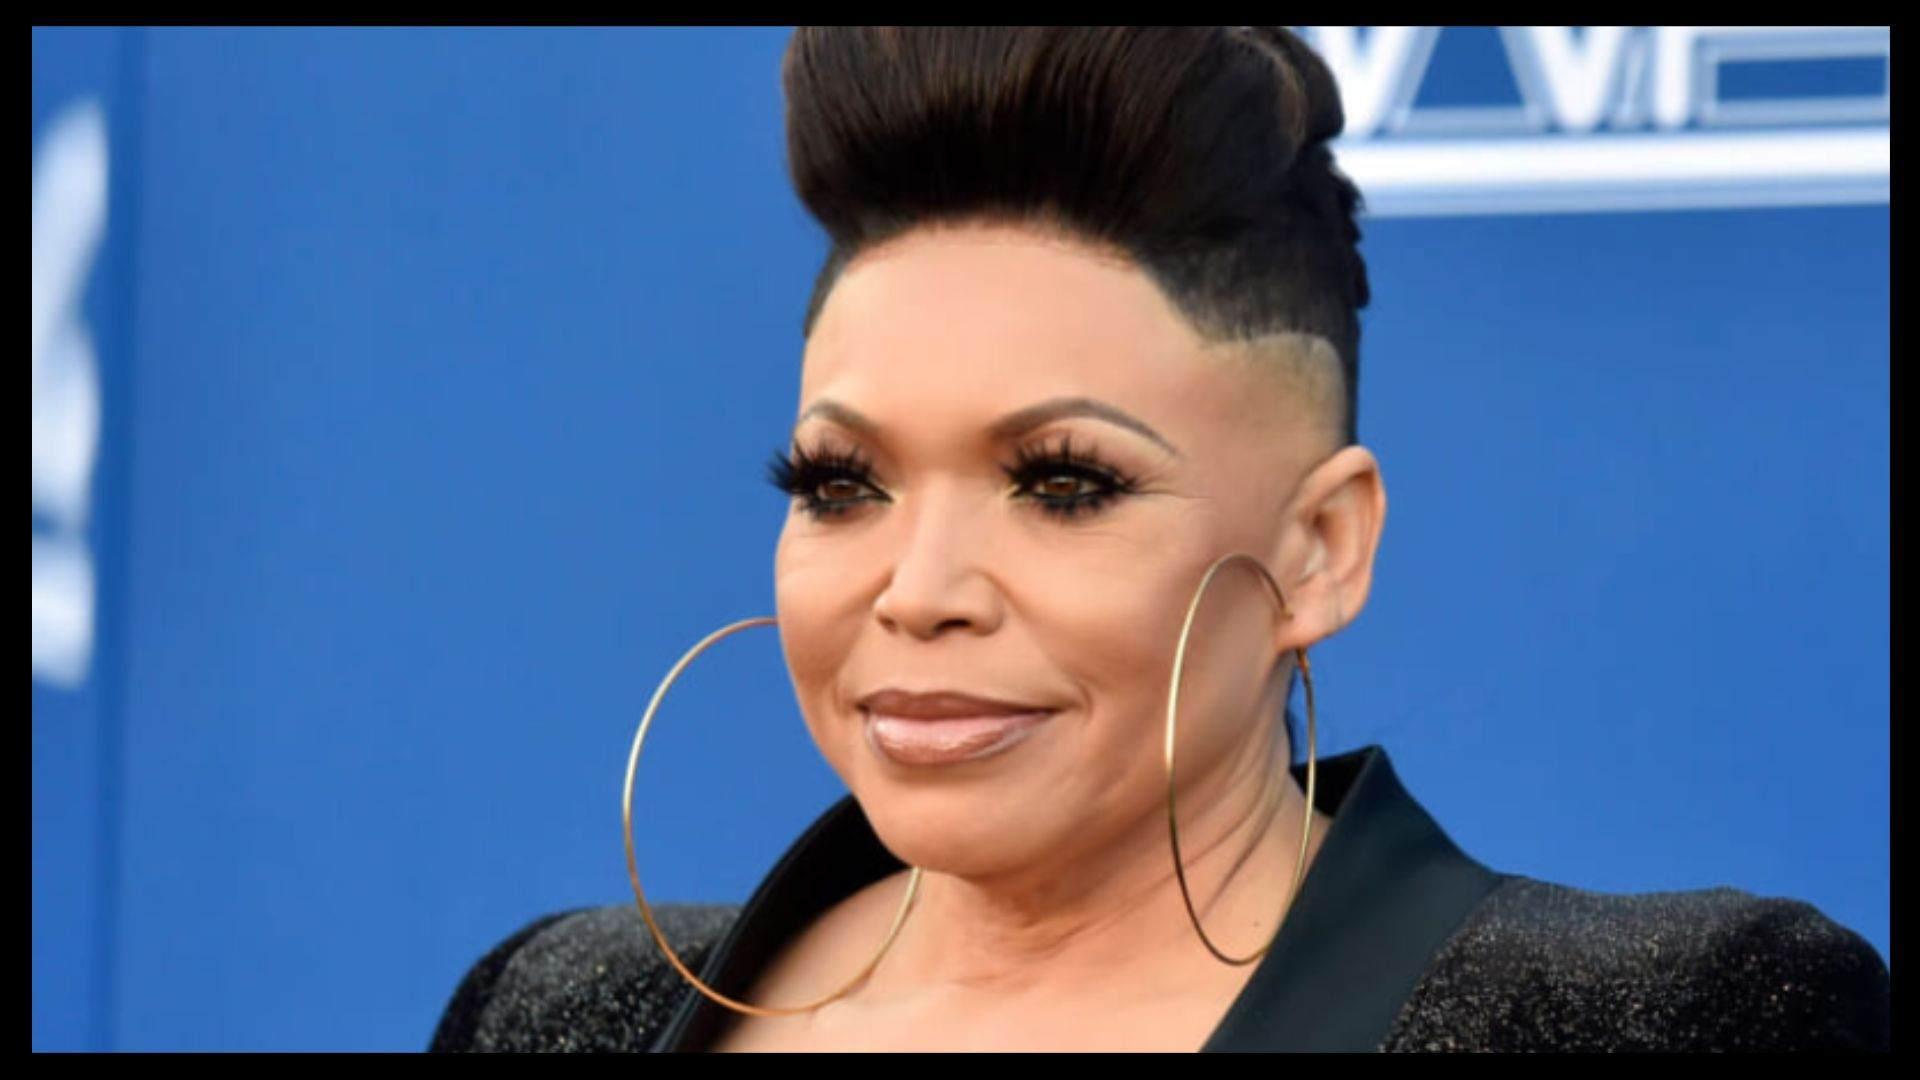 Is Tisha Campbell Net Worth $500K? Popular Actress Earning